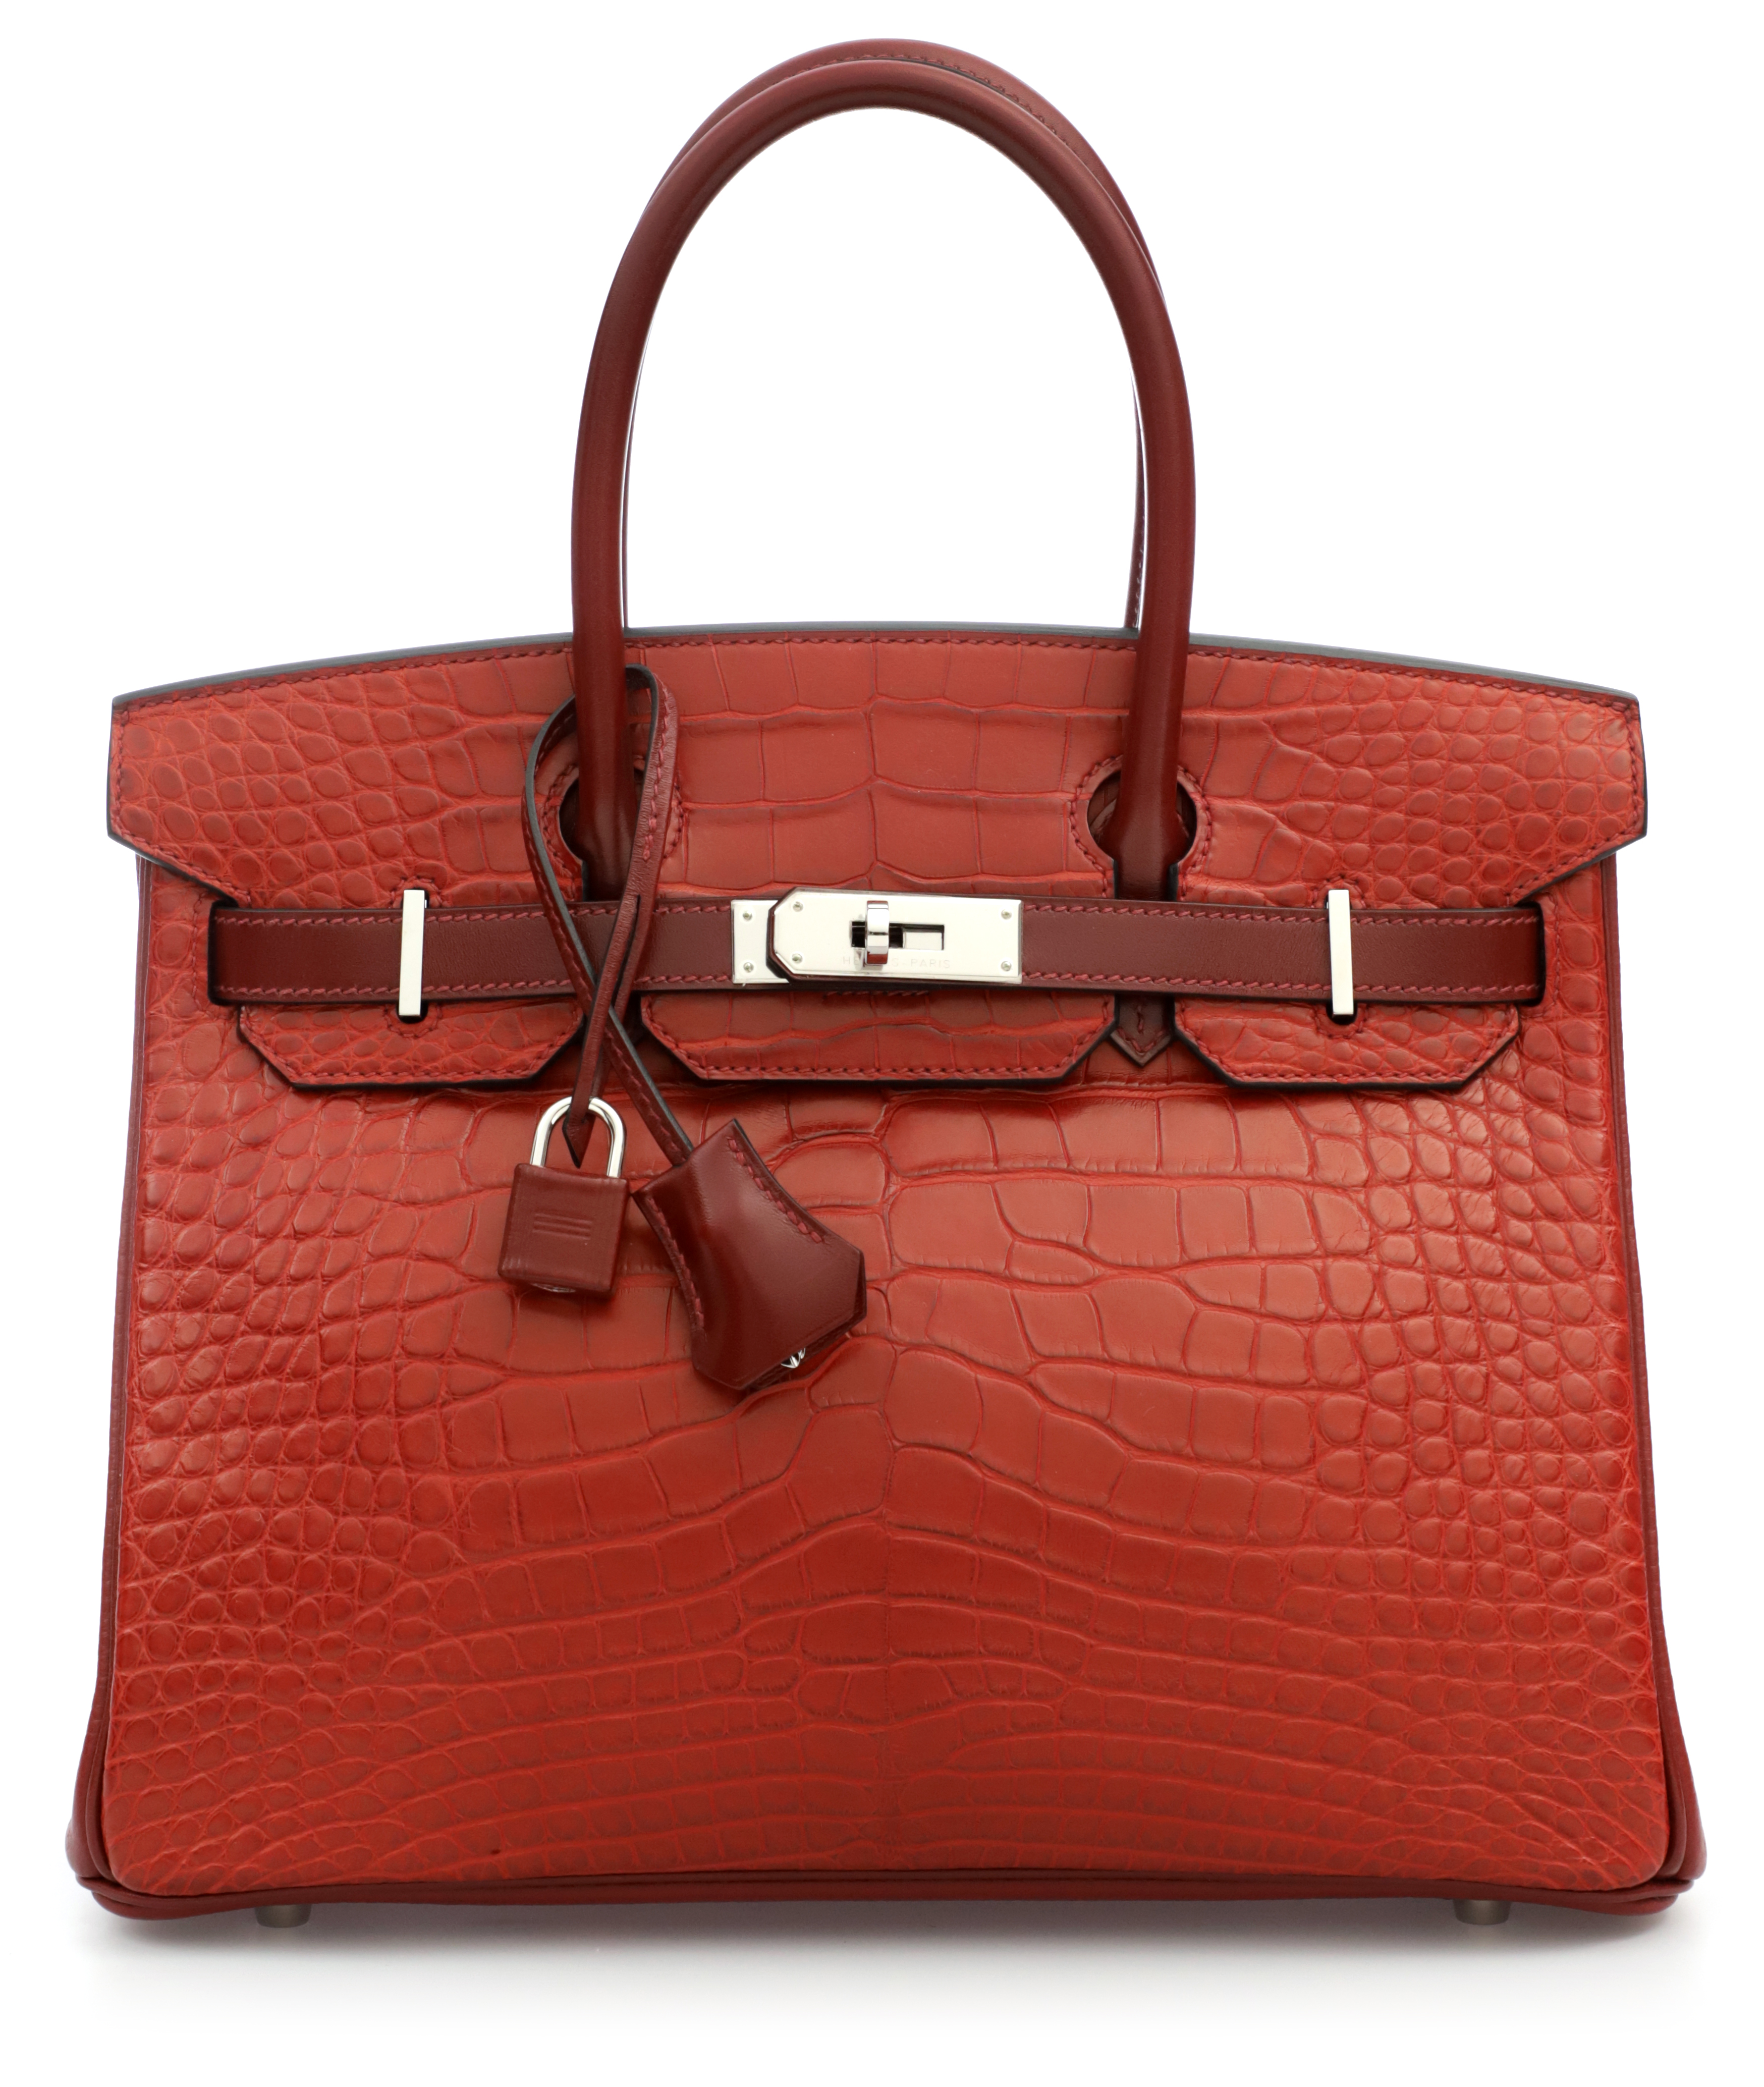 hermes_special-edition-h-alligator-mat-togo-and-box-material-birkin-30-cm